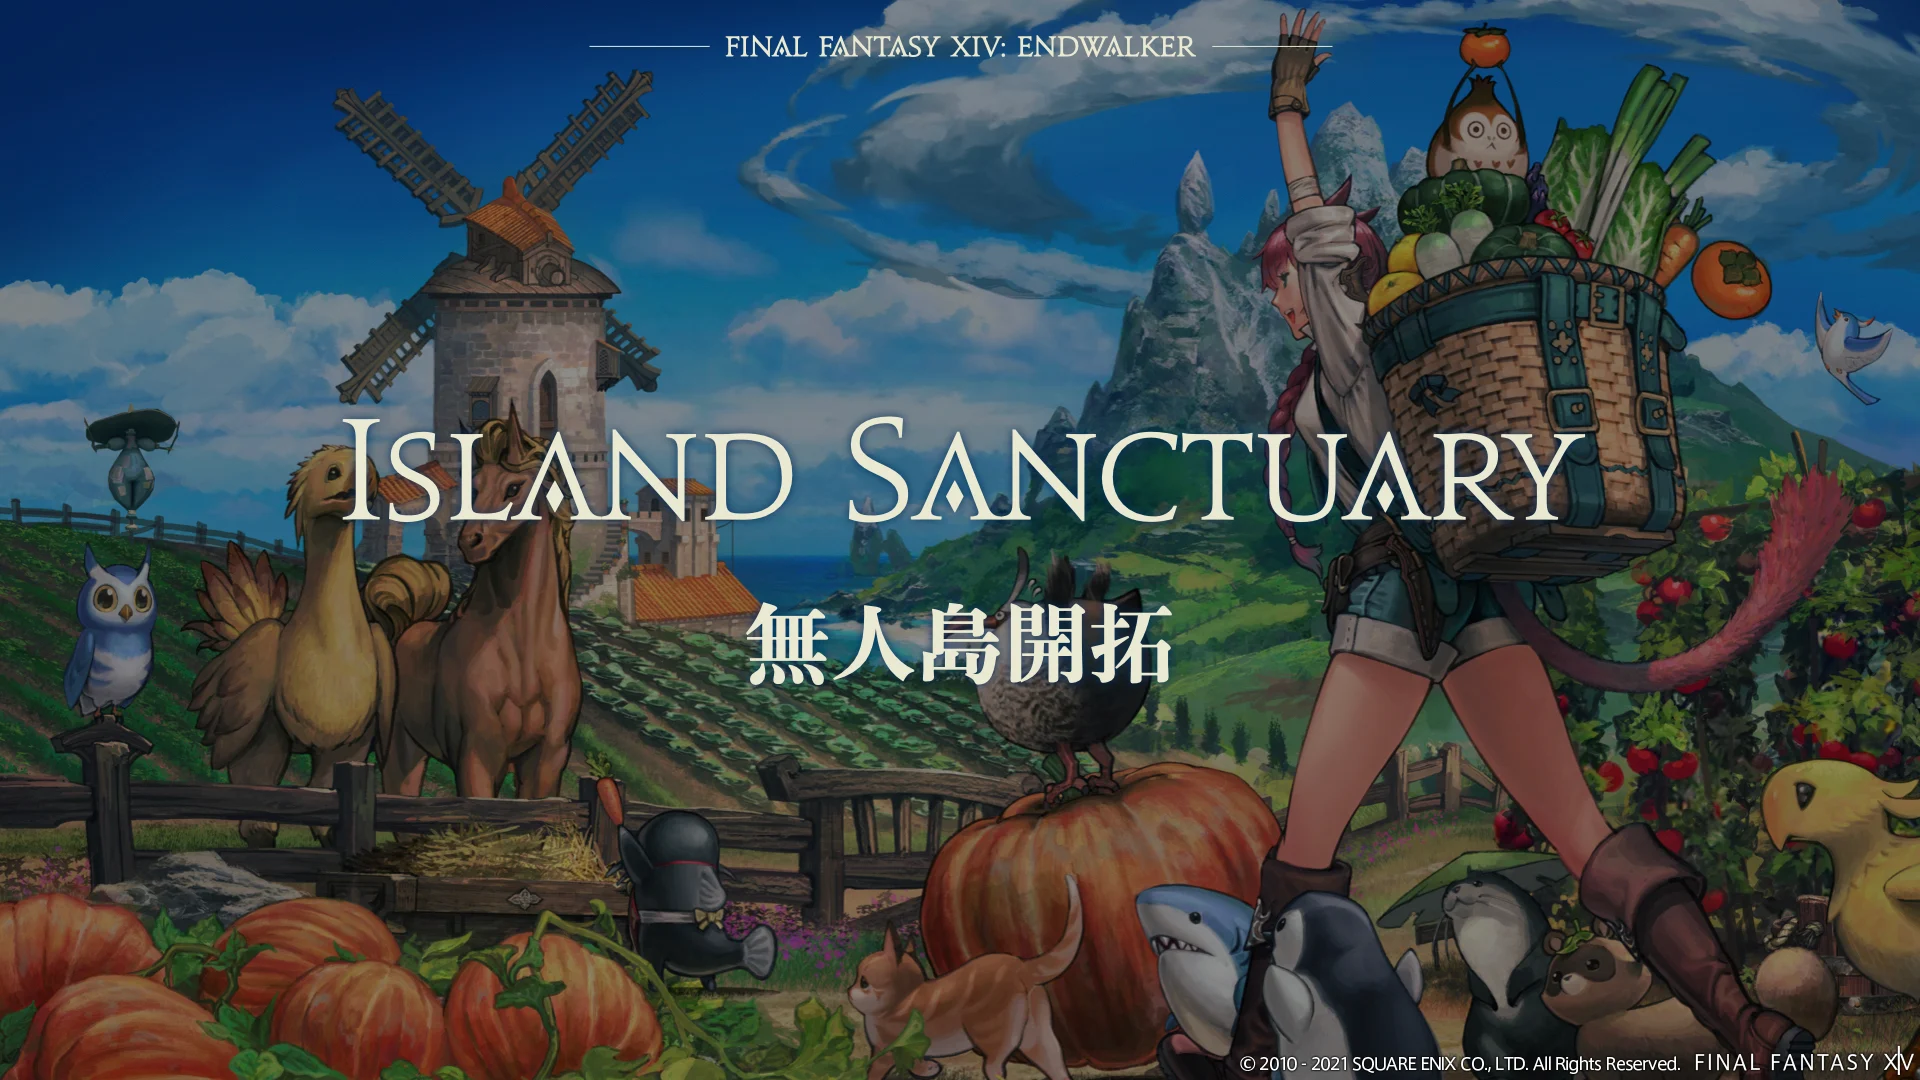 Island Sanctuary in FFXIV - What We Know So Far 9